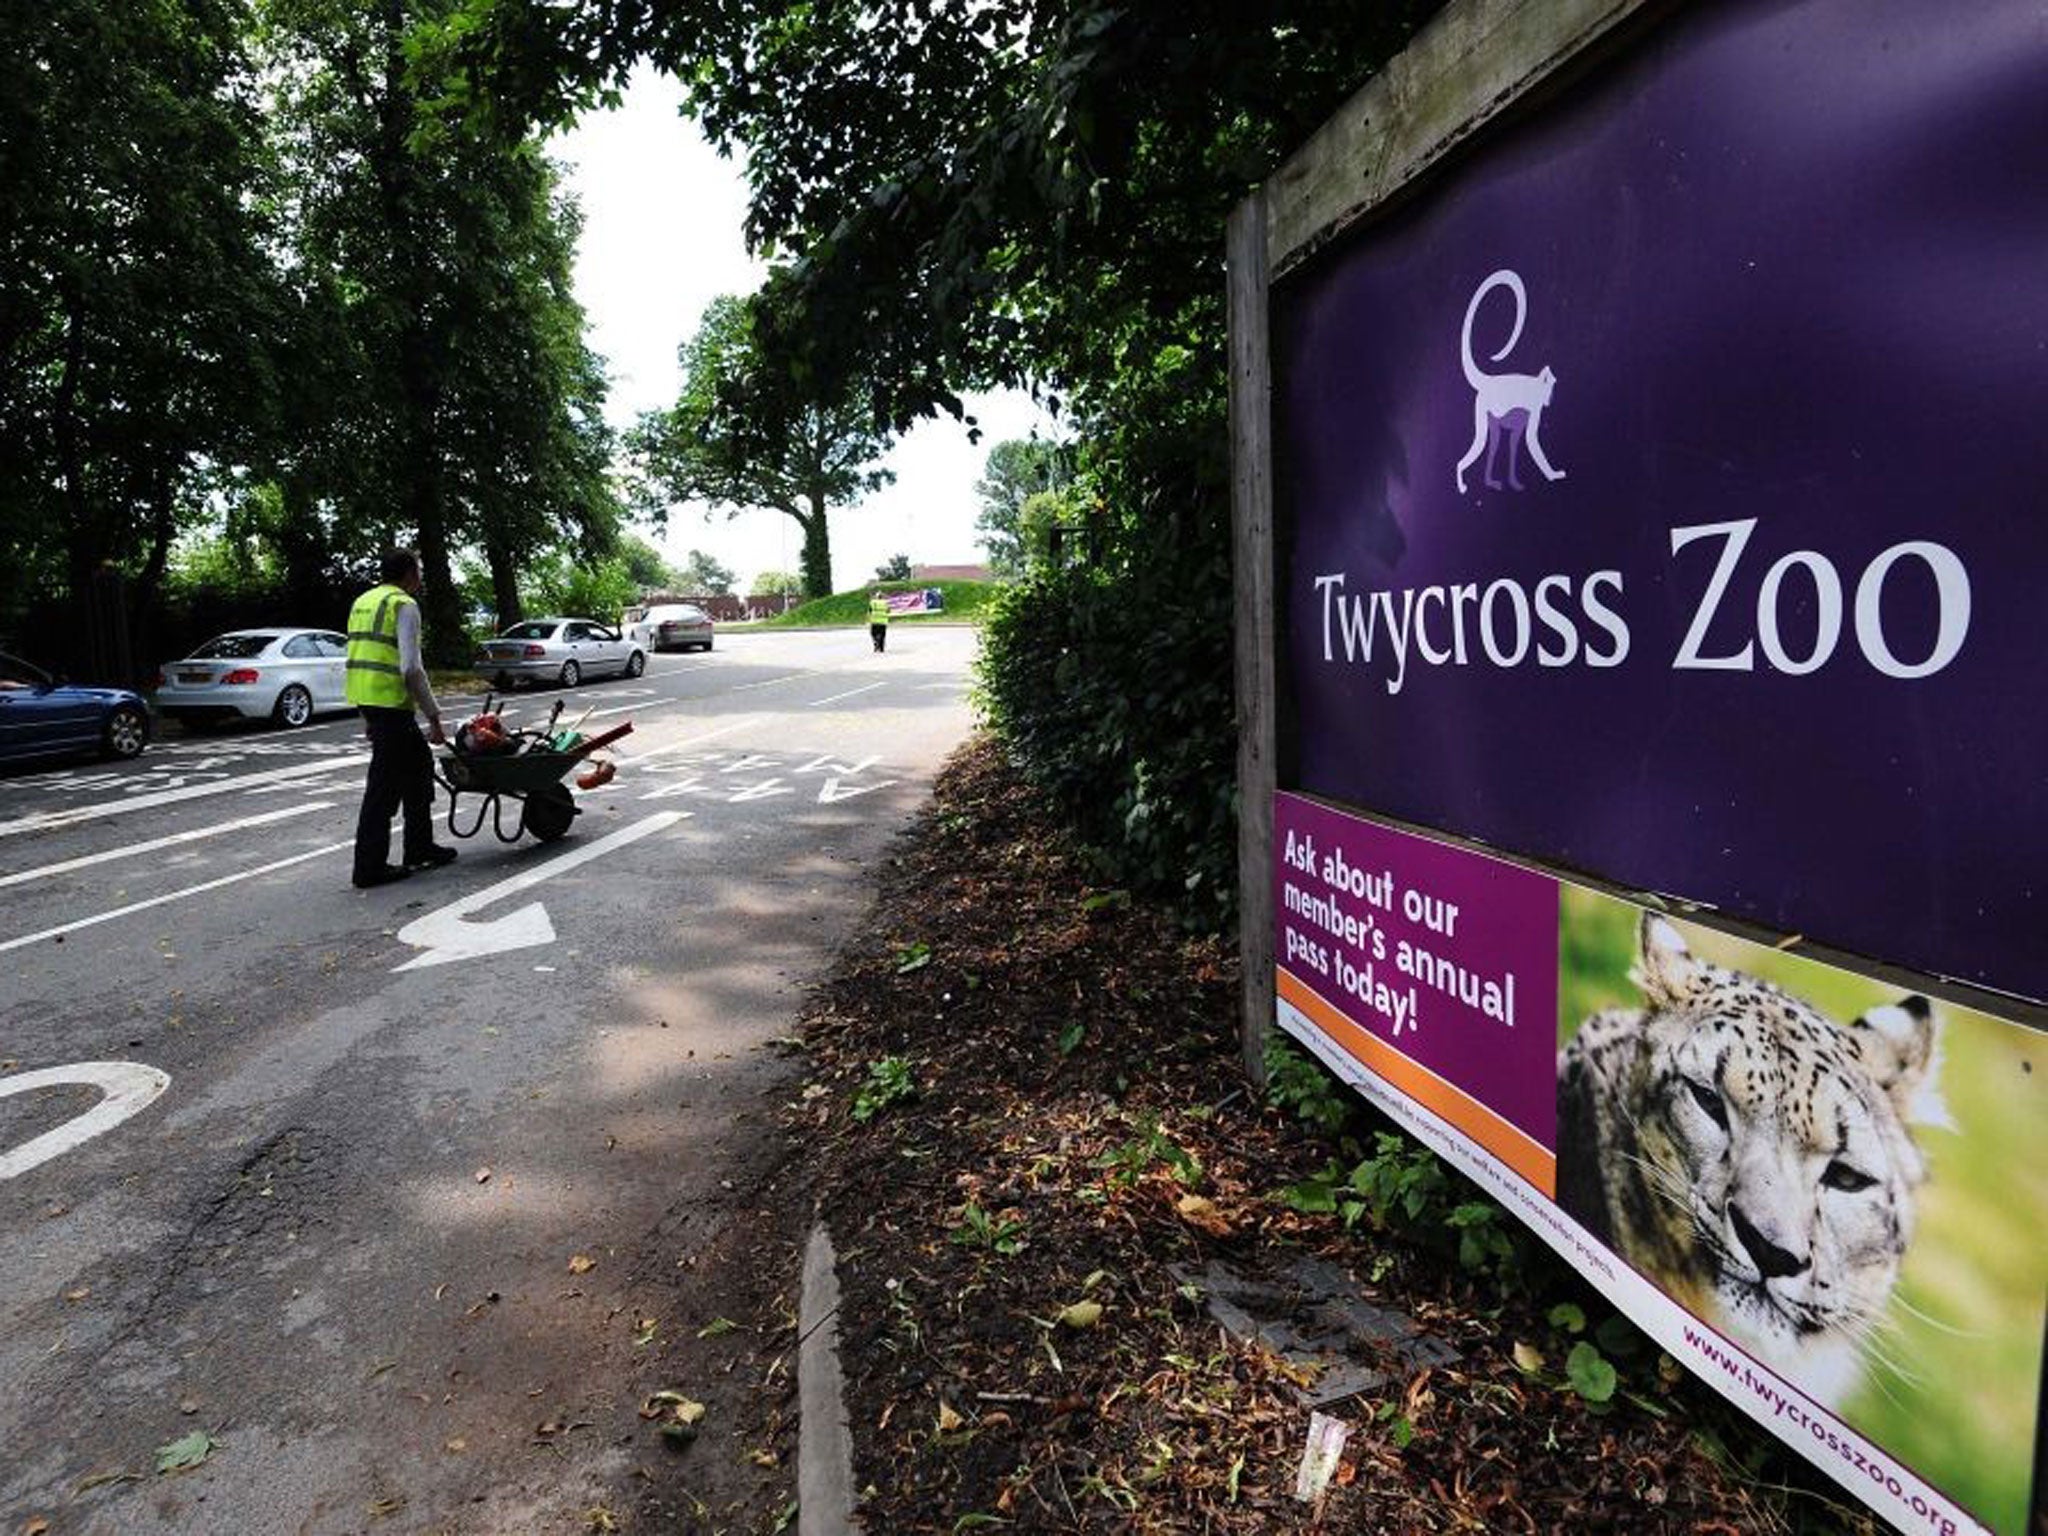 Twycross Zoo has since reopened after the incident earlier this morning in which a group of chimpanzees got into a ‘secure service area’ of their enclosure while being transferred between areas.